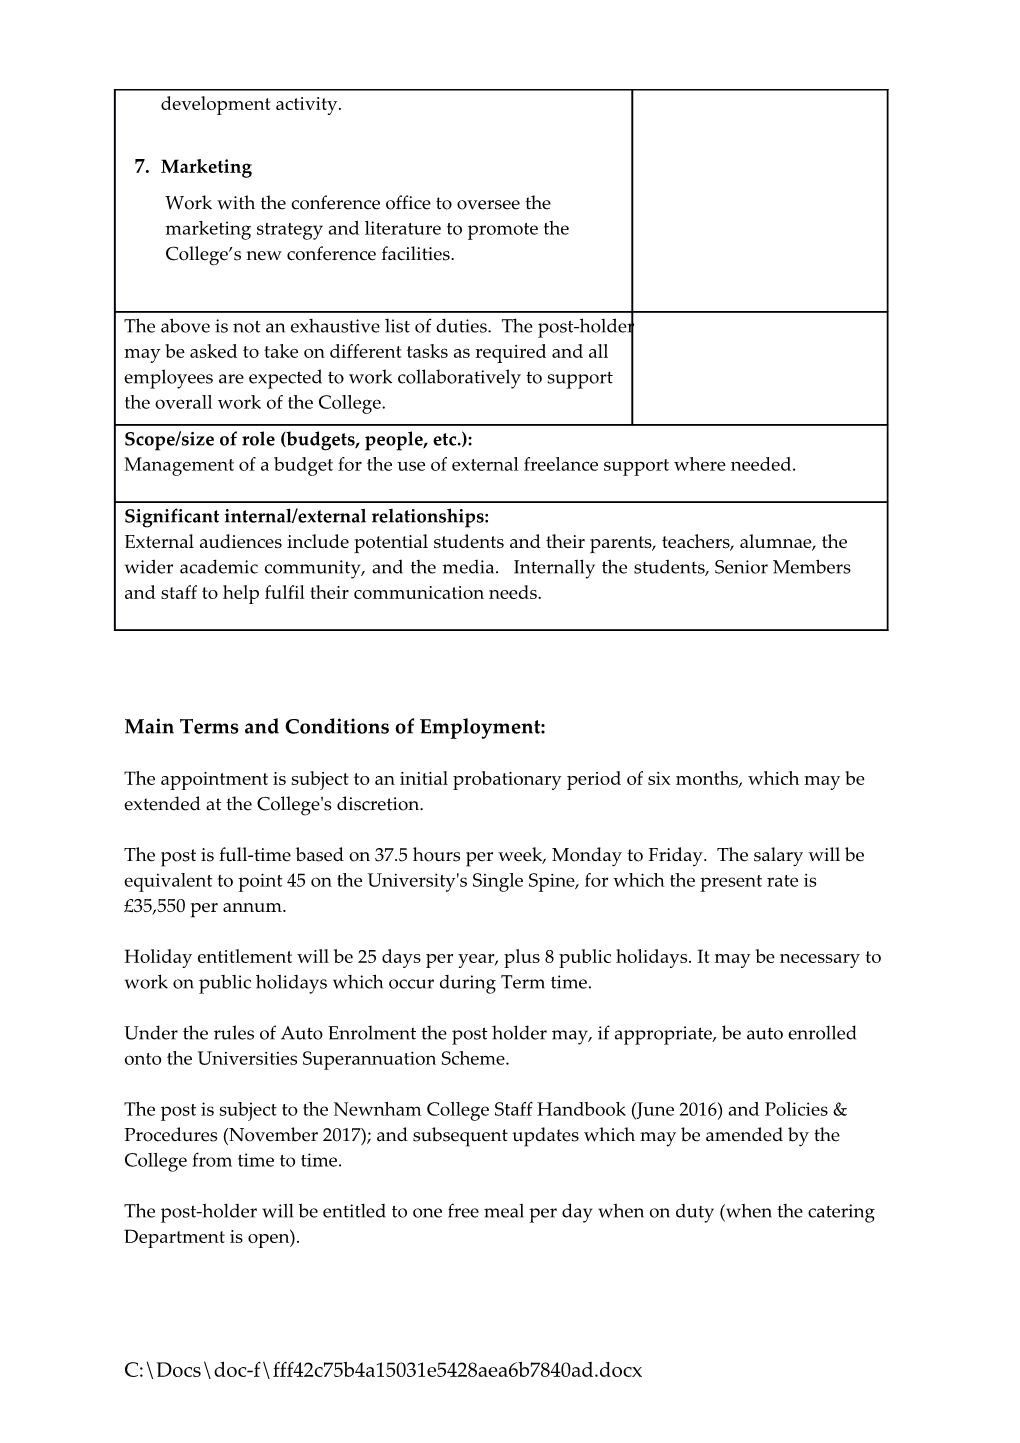 Main Terms and Conditions of Employment